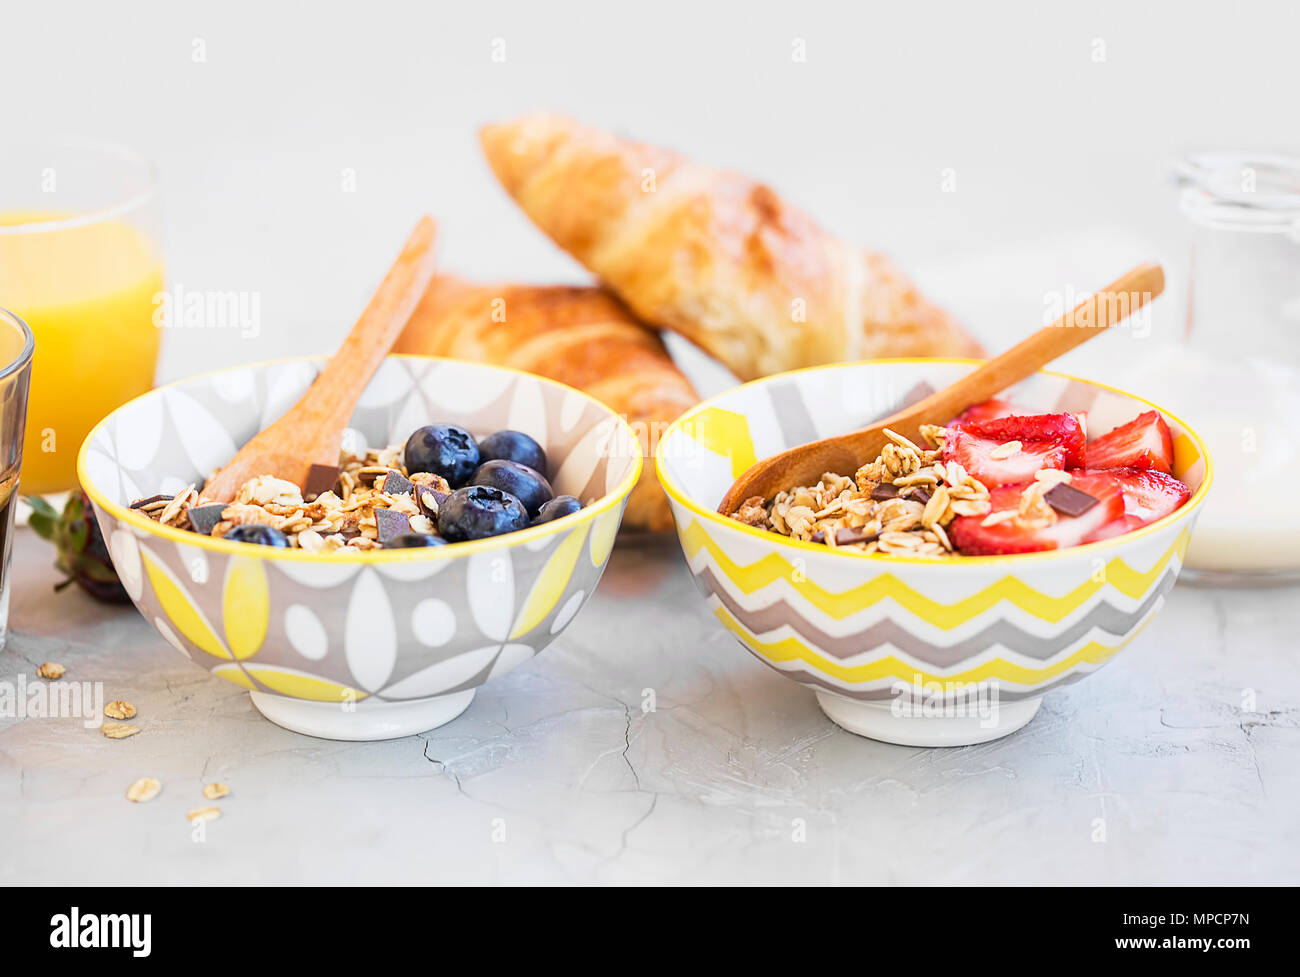 Muesli bowls with strawberries, blueberries fruits and milk ,healthy breakfast bowls Stock Photo